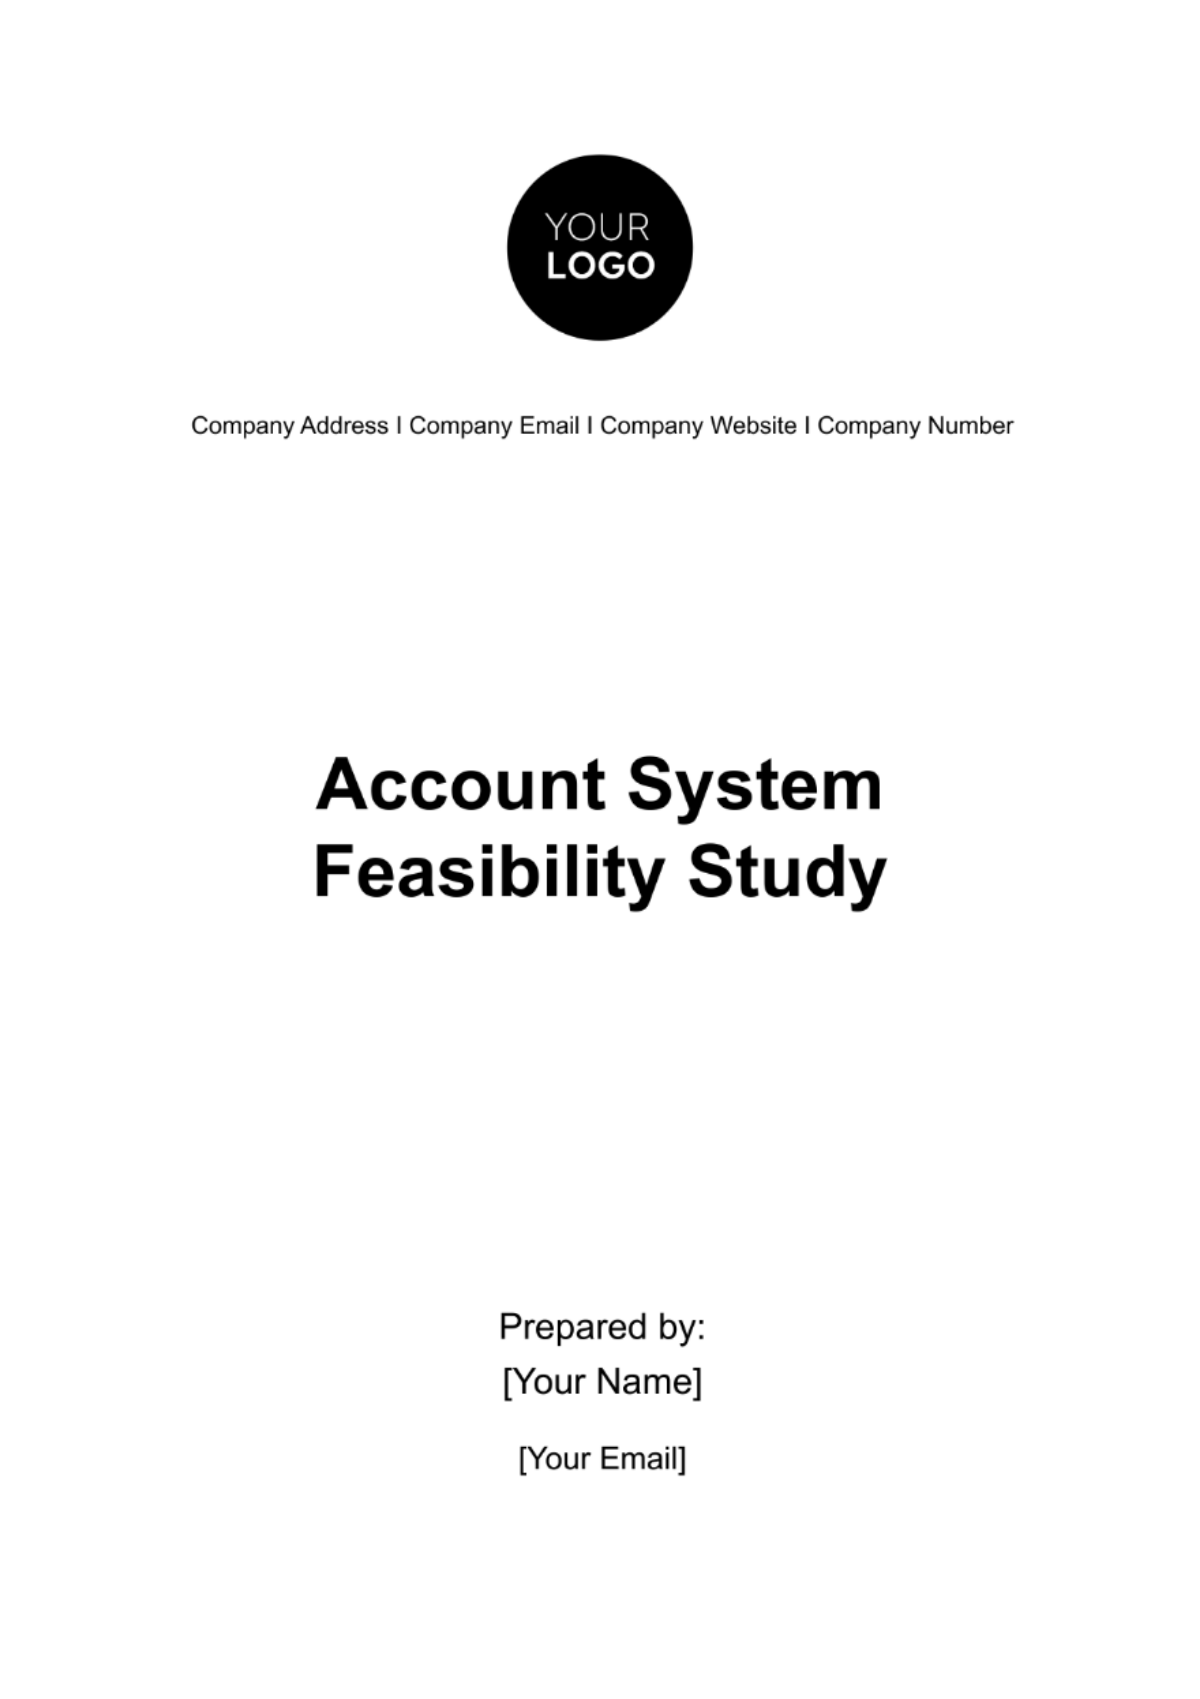 Account System Feasibility Study Template